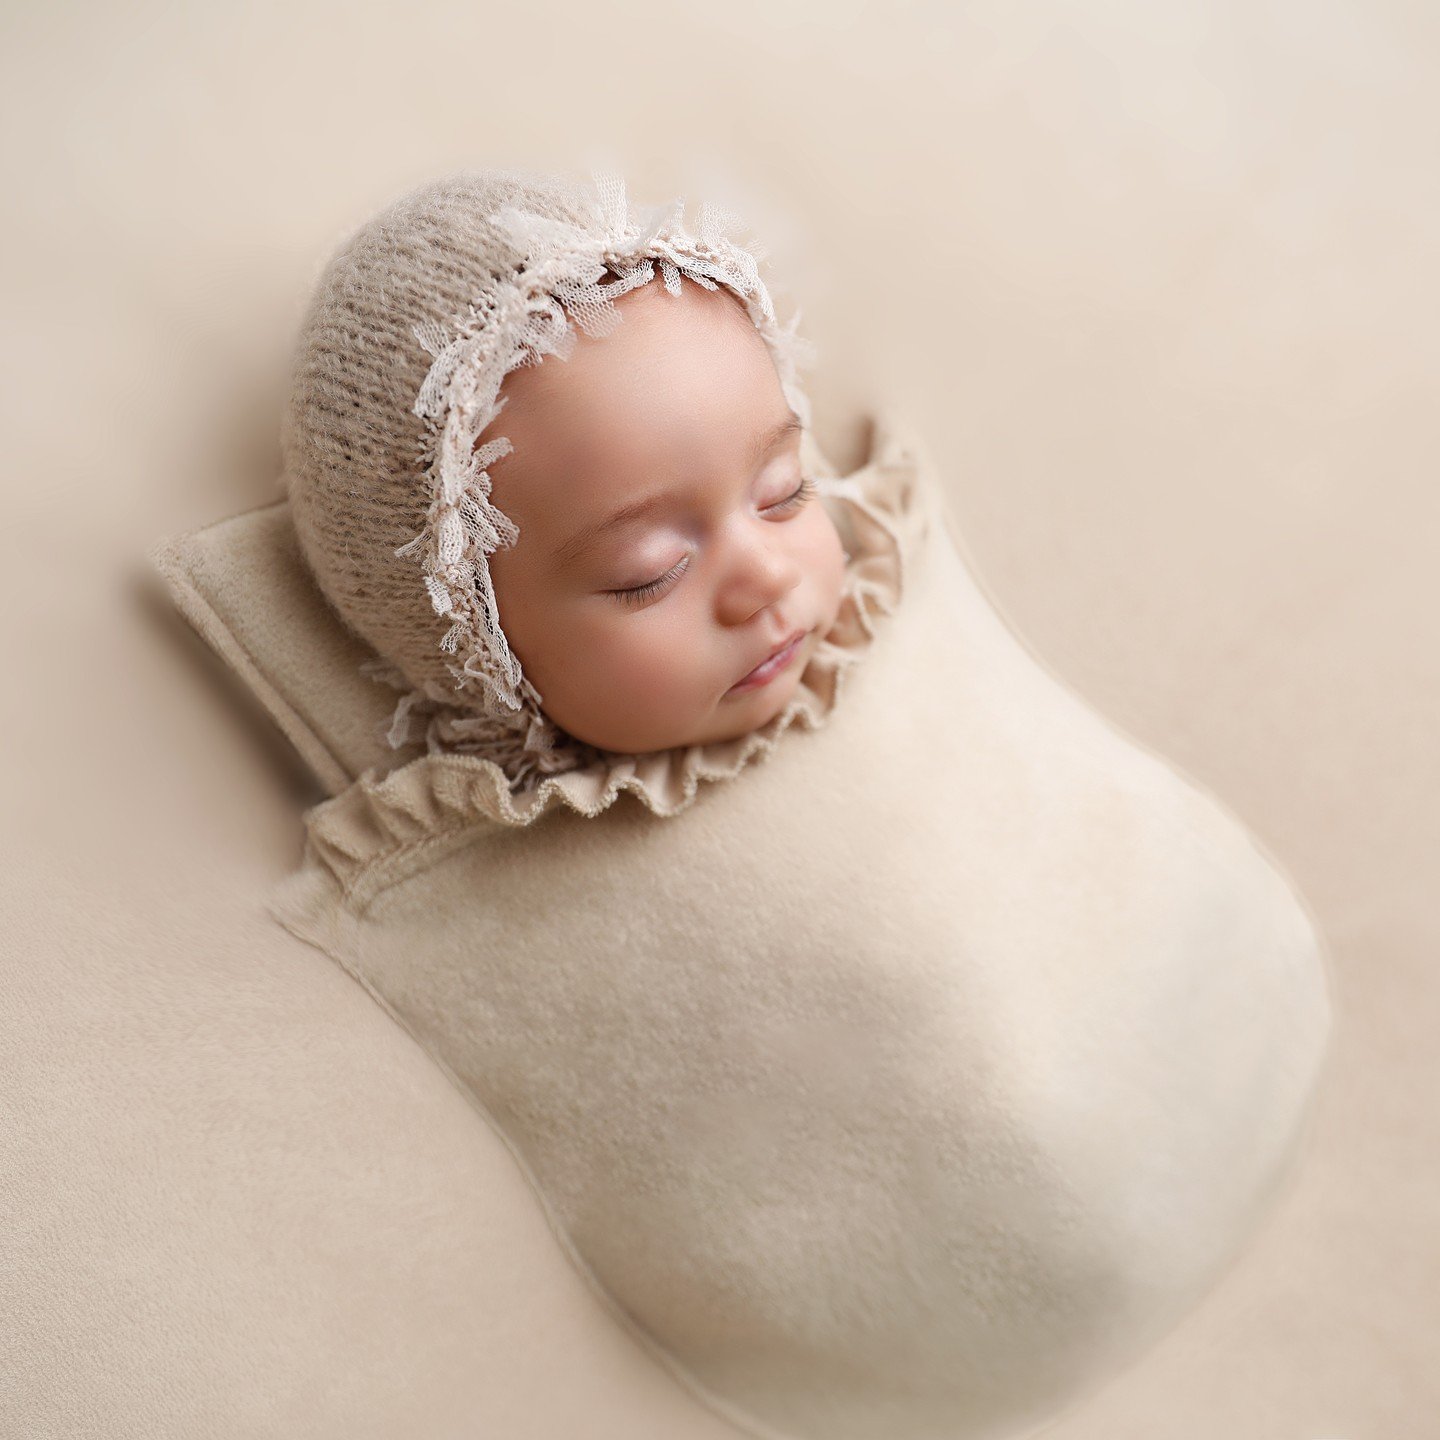 a new ruffled pocket beanbag cover that I am in love with and this amazing 7 week perfect baby...➡️www.anabrandt.com

#NewbornPhotography
#CaliforniaPhotographer
#CelebrityPhotographer
#NewbornPosing
#PhotographyTips
#BehindTheScenes
#BTSPhotography
